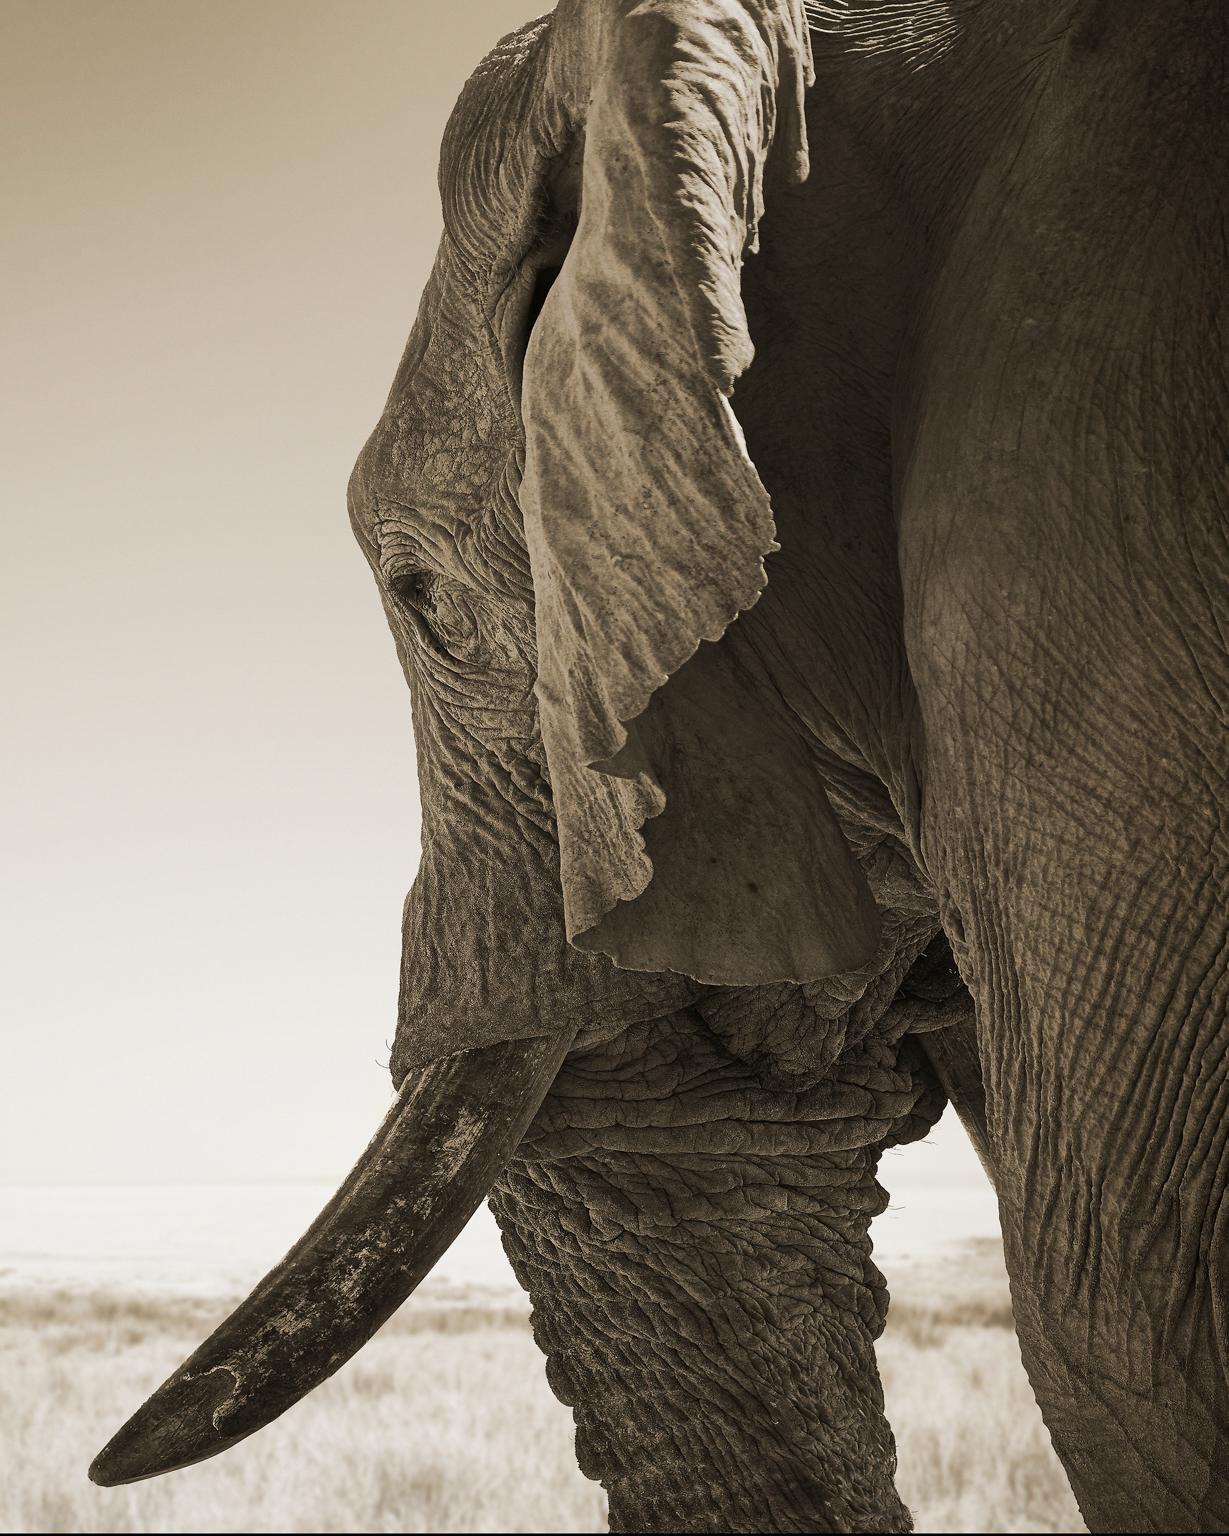 Elephant-02, Namibia, 2016. Archival Pigment Print. Edition of 7.
Signed, Dated and Numbered by the Artist.

Chris Gordaneer is one of the most passionate photographers of our time. His photography is at the intersection of beauty and perfection.